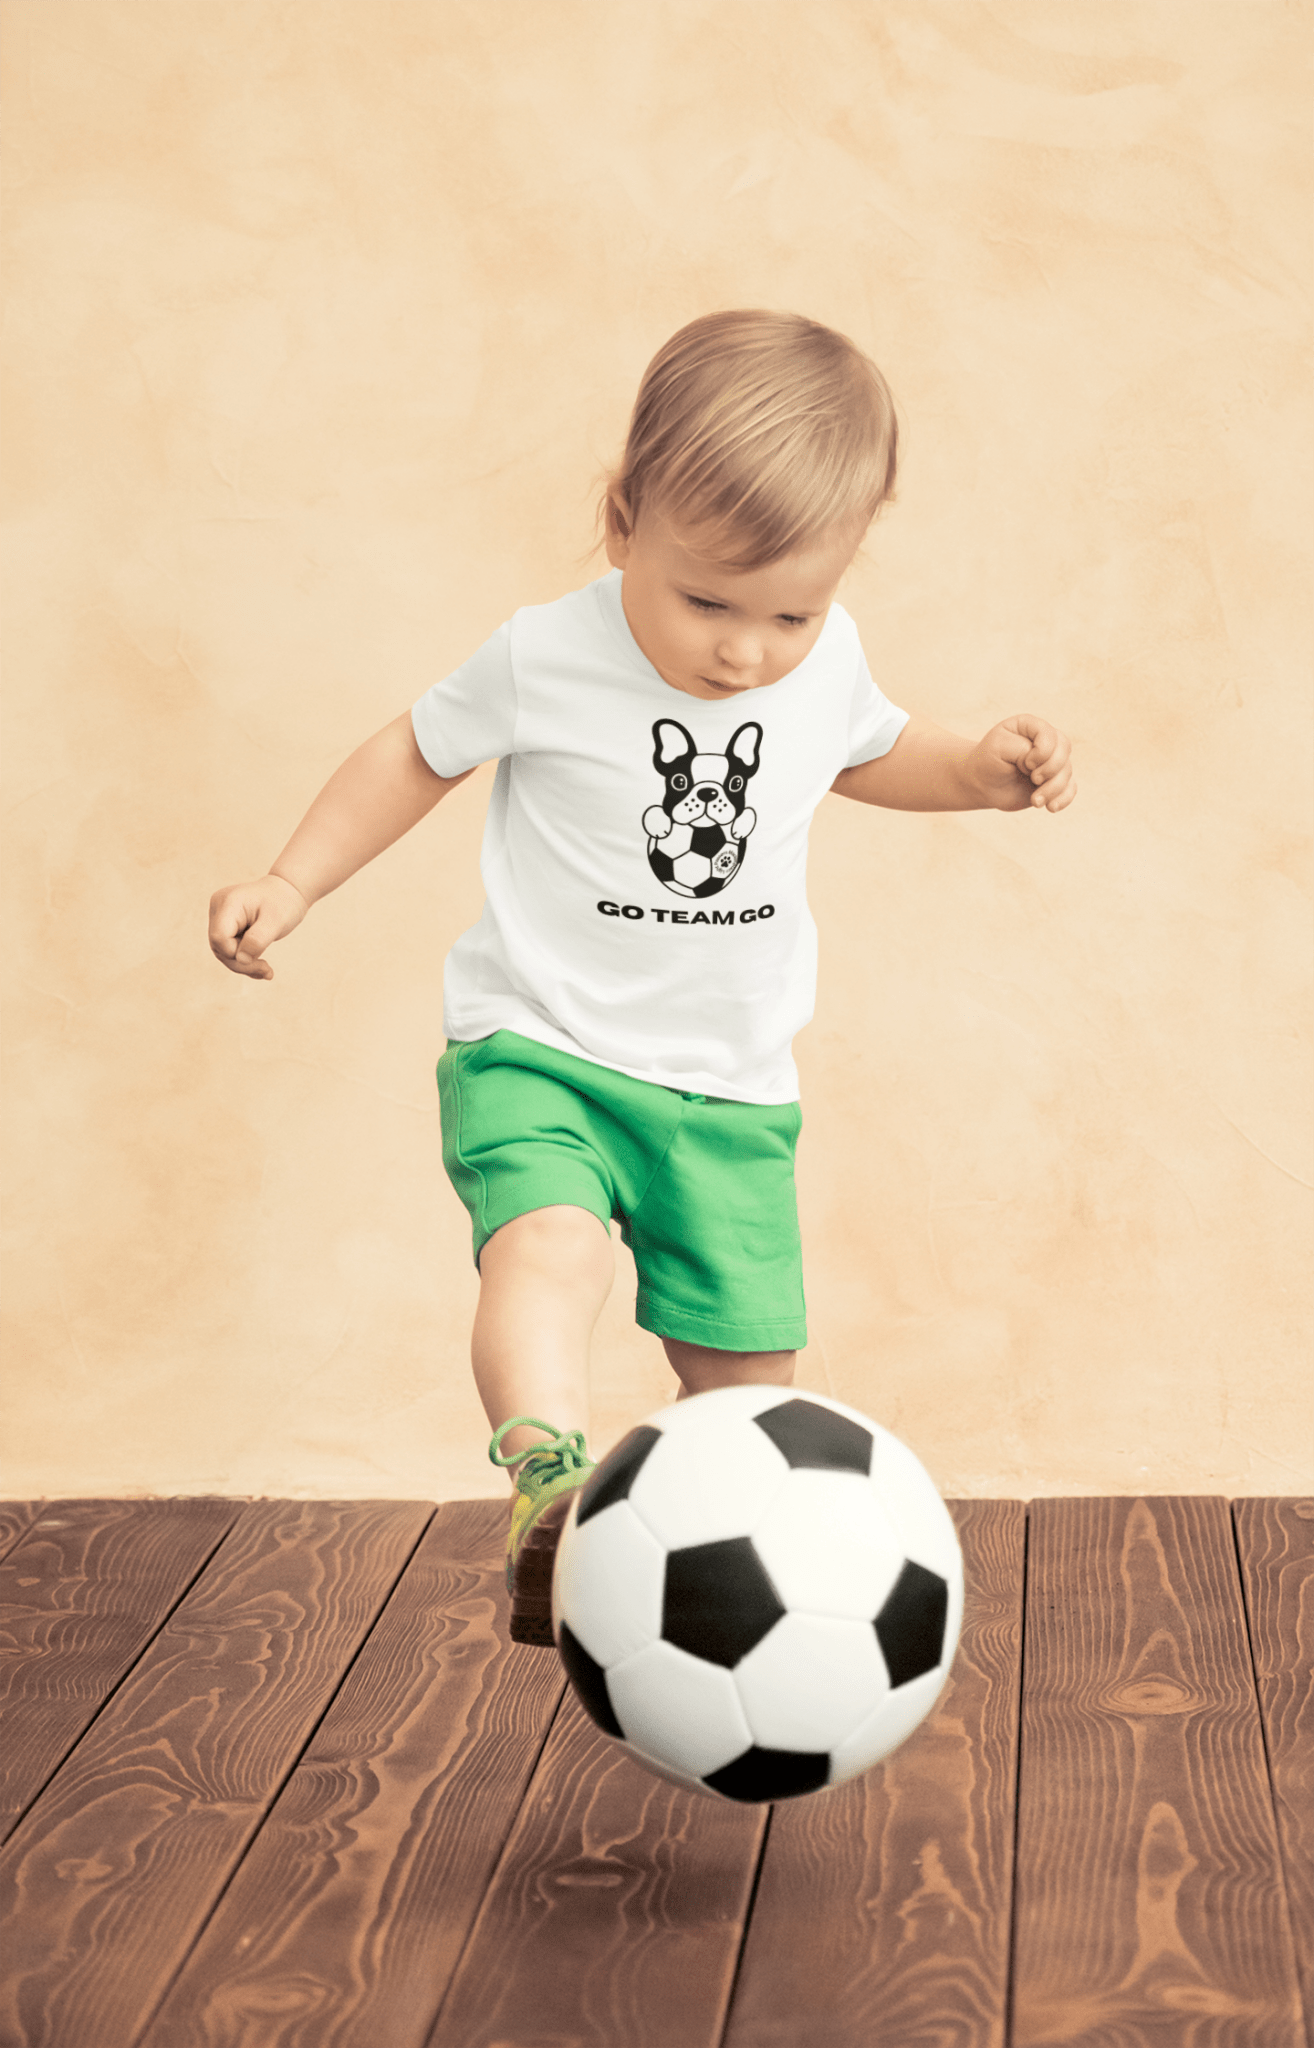 A toddler wearing a Soccer Dog Go Team Go T-shirt, kicking a soccer ball, with a close-up of the ball and a dog. Perfect for sensitive skin, 100% combed cotton, tear-away label.